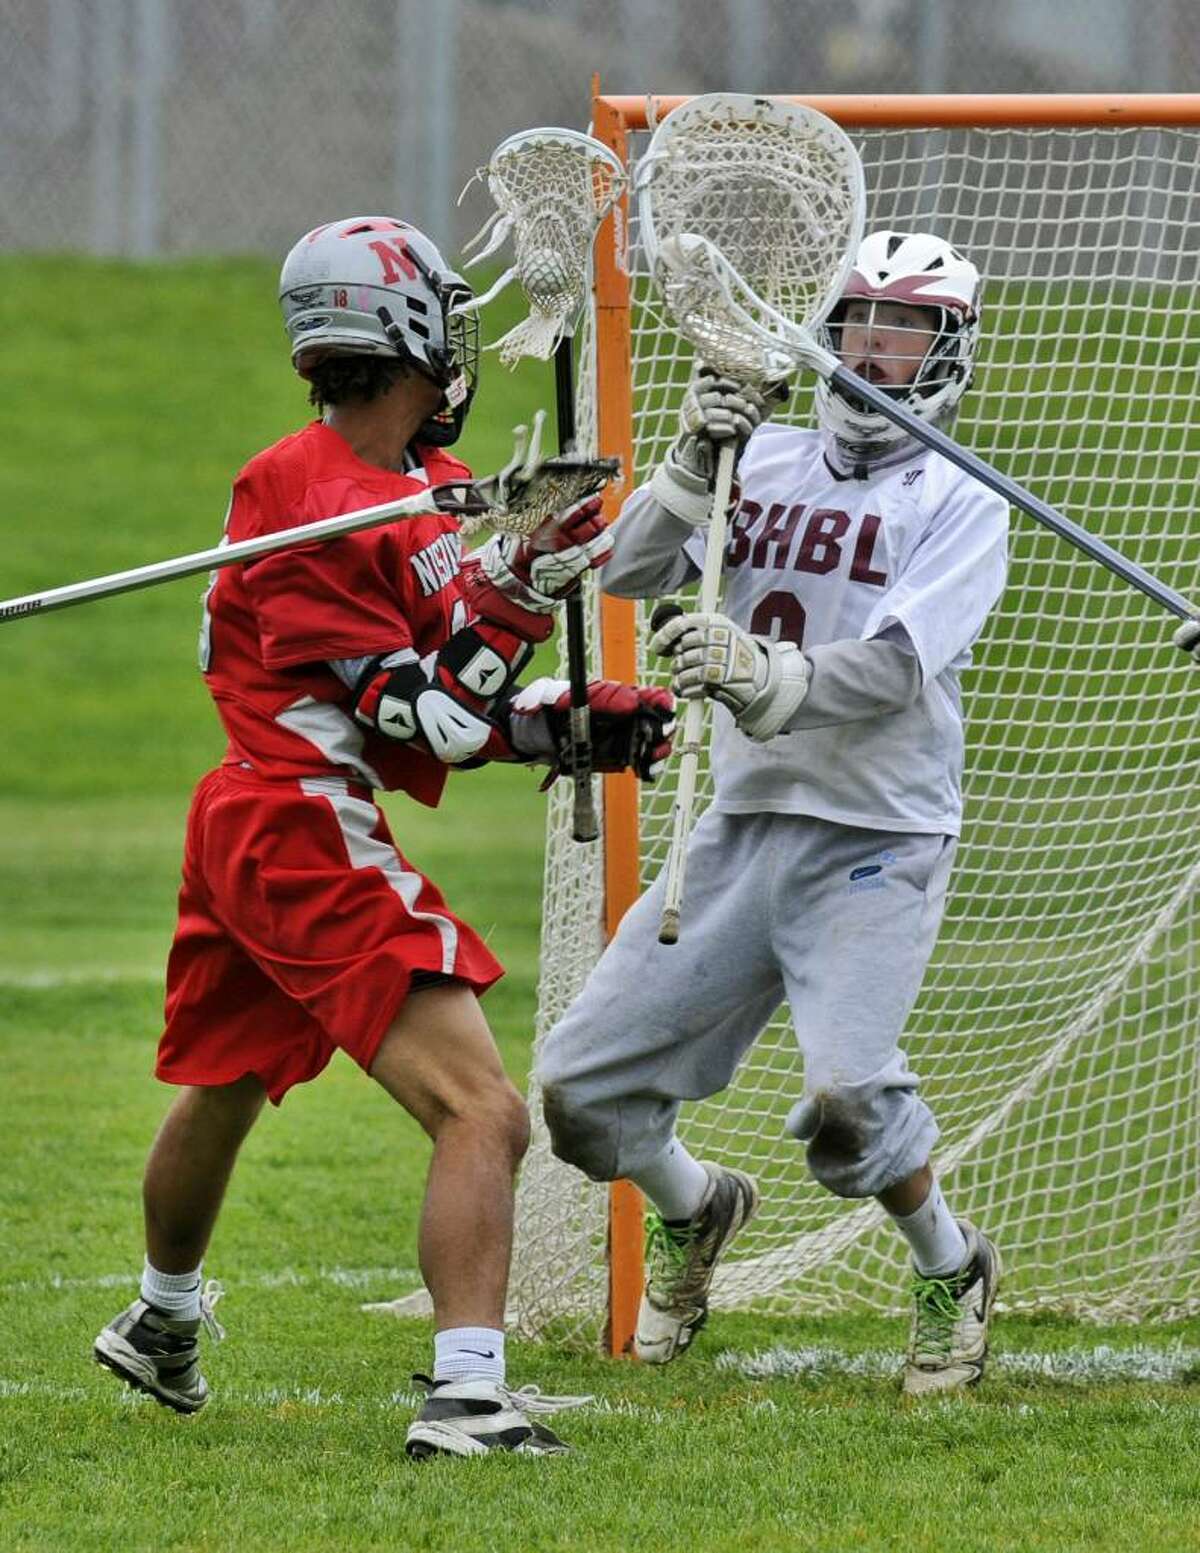 Goalkeeper Connor Nash, right, is one of the players Burnt Hills is counting on as the rebuilding program hopes to become a contender in boys' lacrosse. ( Philip Kamrass / Times Union)